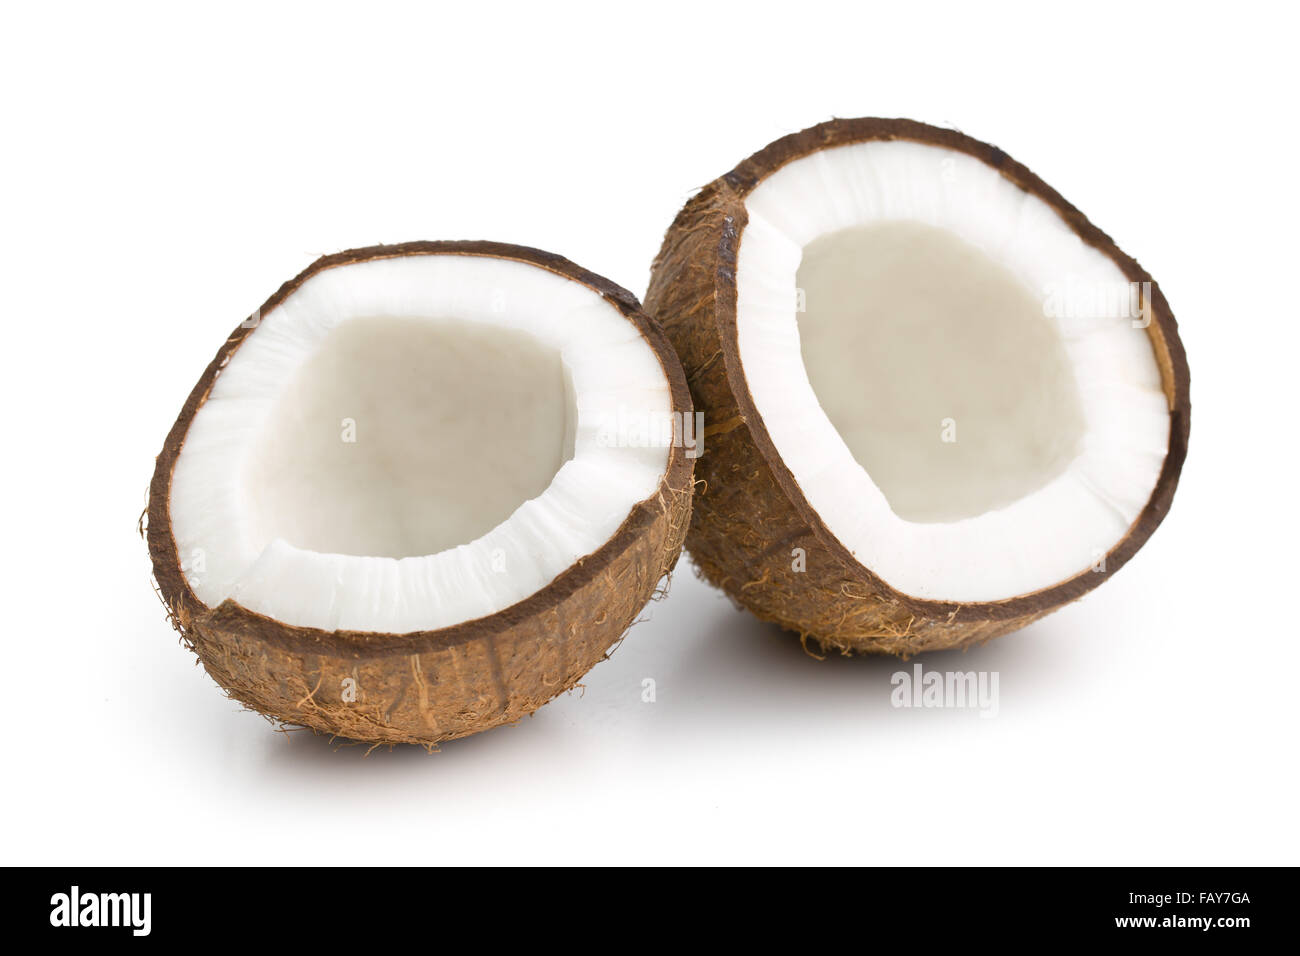 the halved coconut on white background Stock Photo